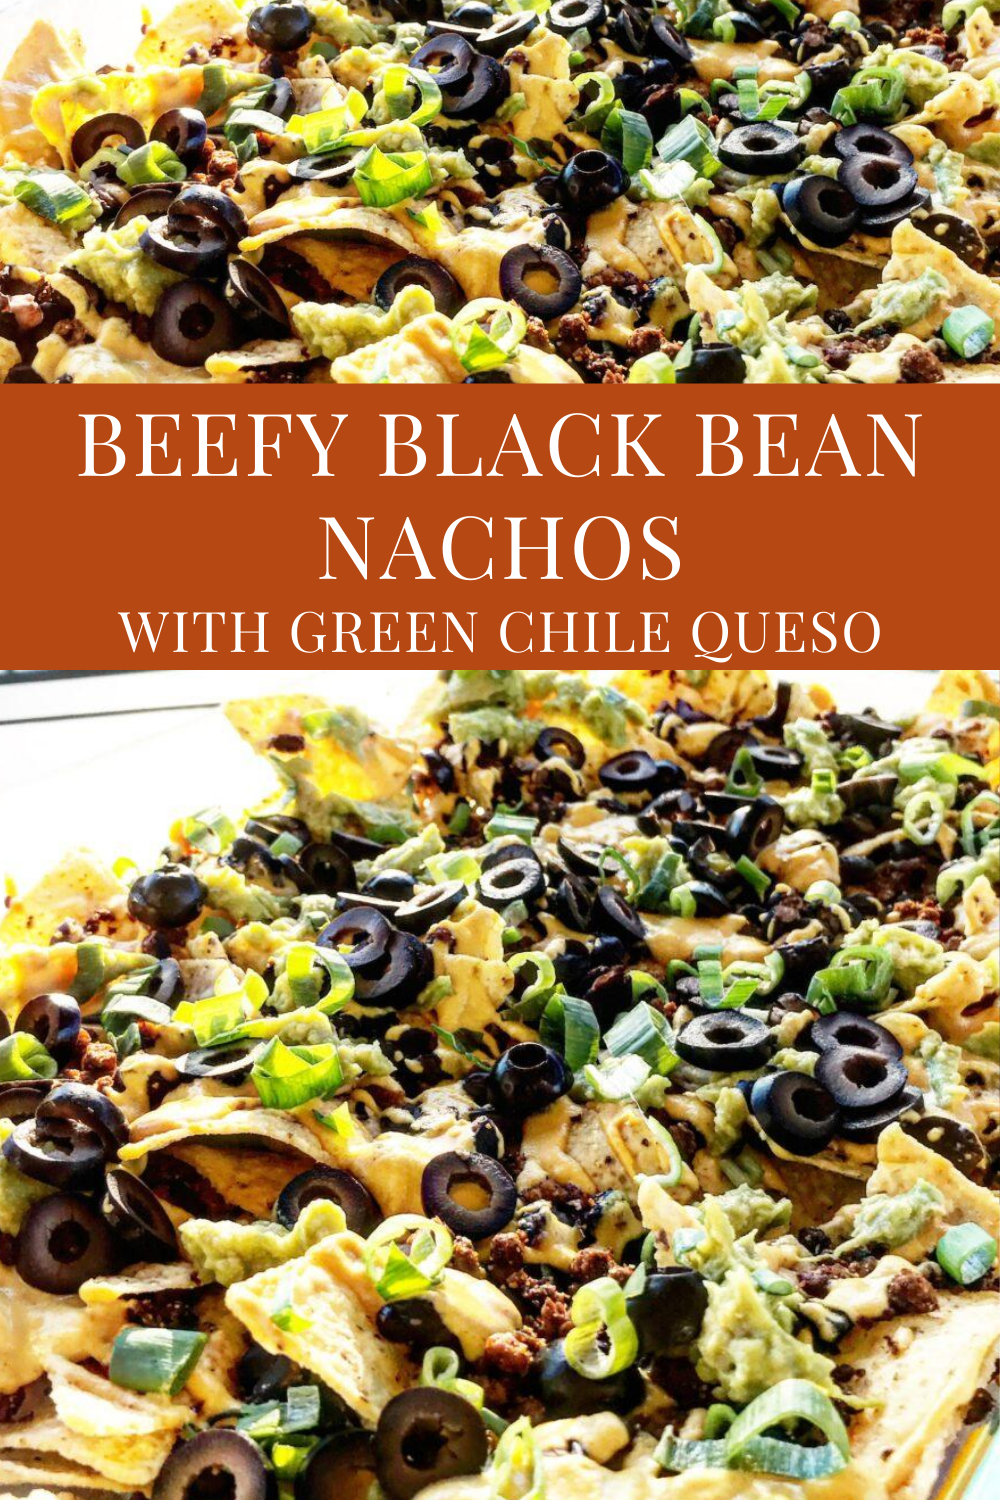 Beefy Black Bean Nachos ~ Easy to make and always a crowd-pleaser! These loaded vegan nachos drizzled with dairy-free Green Chile Queso are perfect for game day snacking. via @thiswifecooks